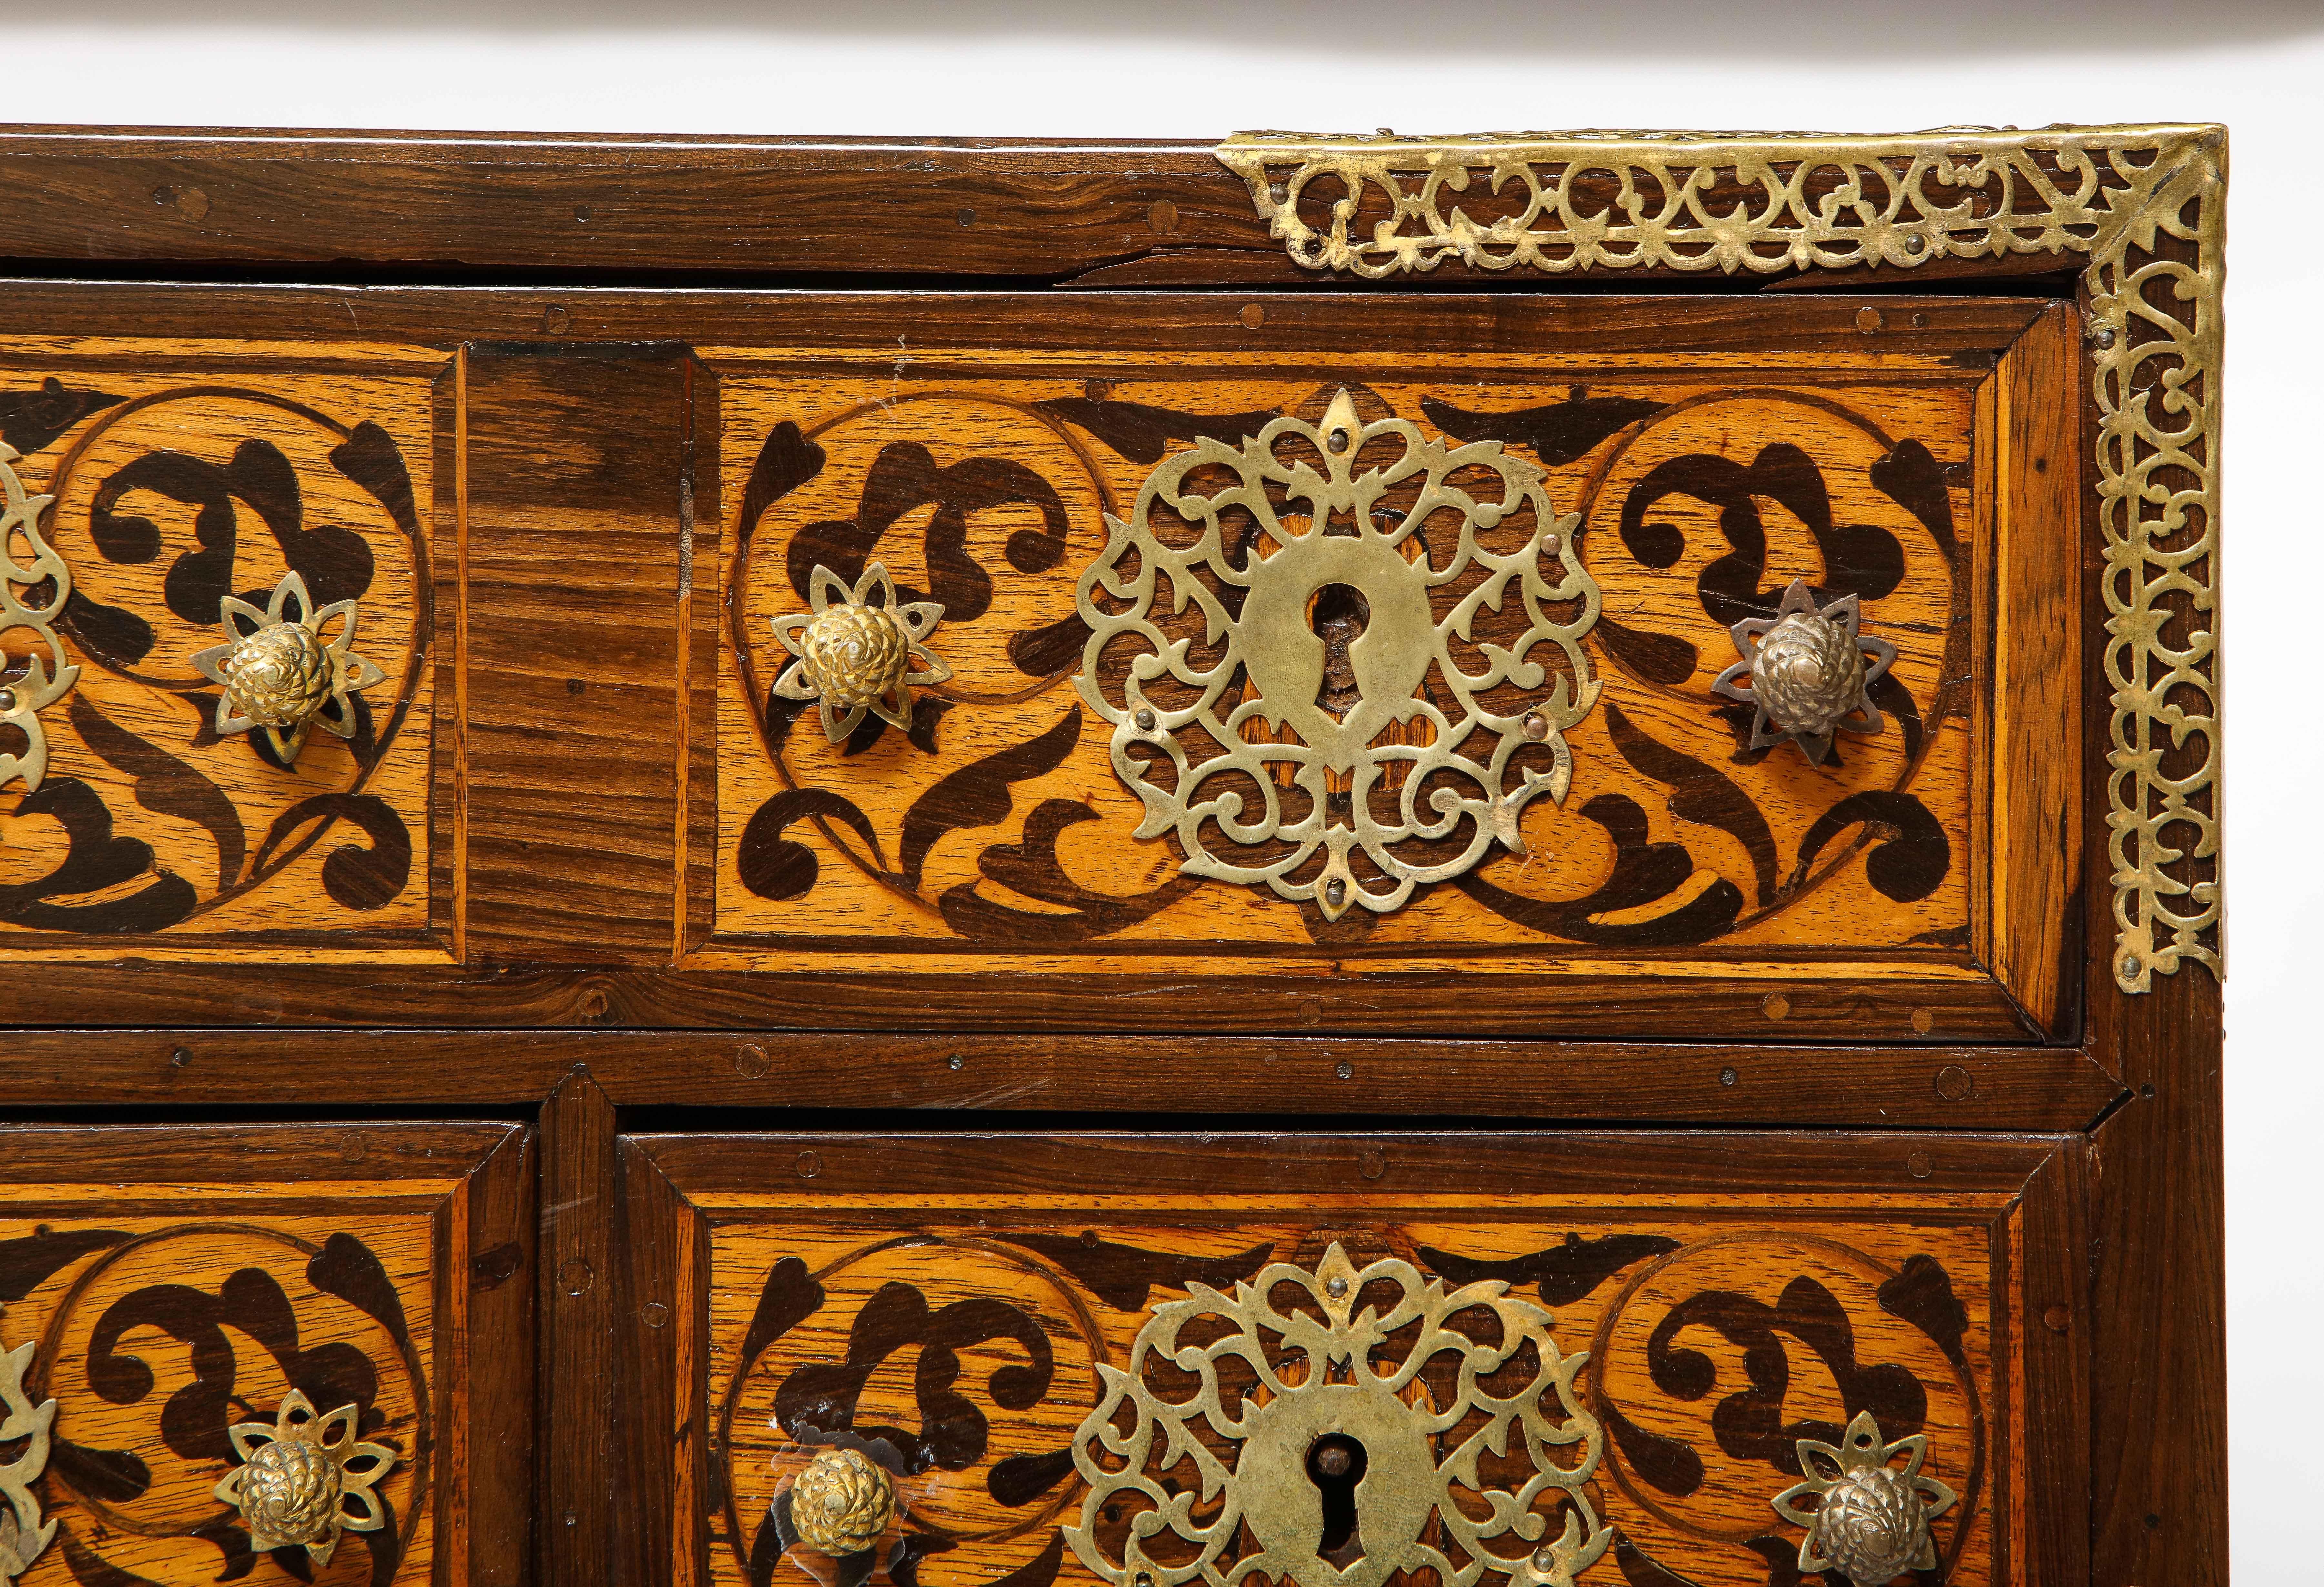 Late 17th Century Indo-Portuguese Brass-Mounted Hardwood and Indian Wood Marquetry Cabinet For Sale